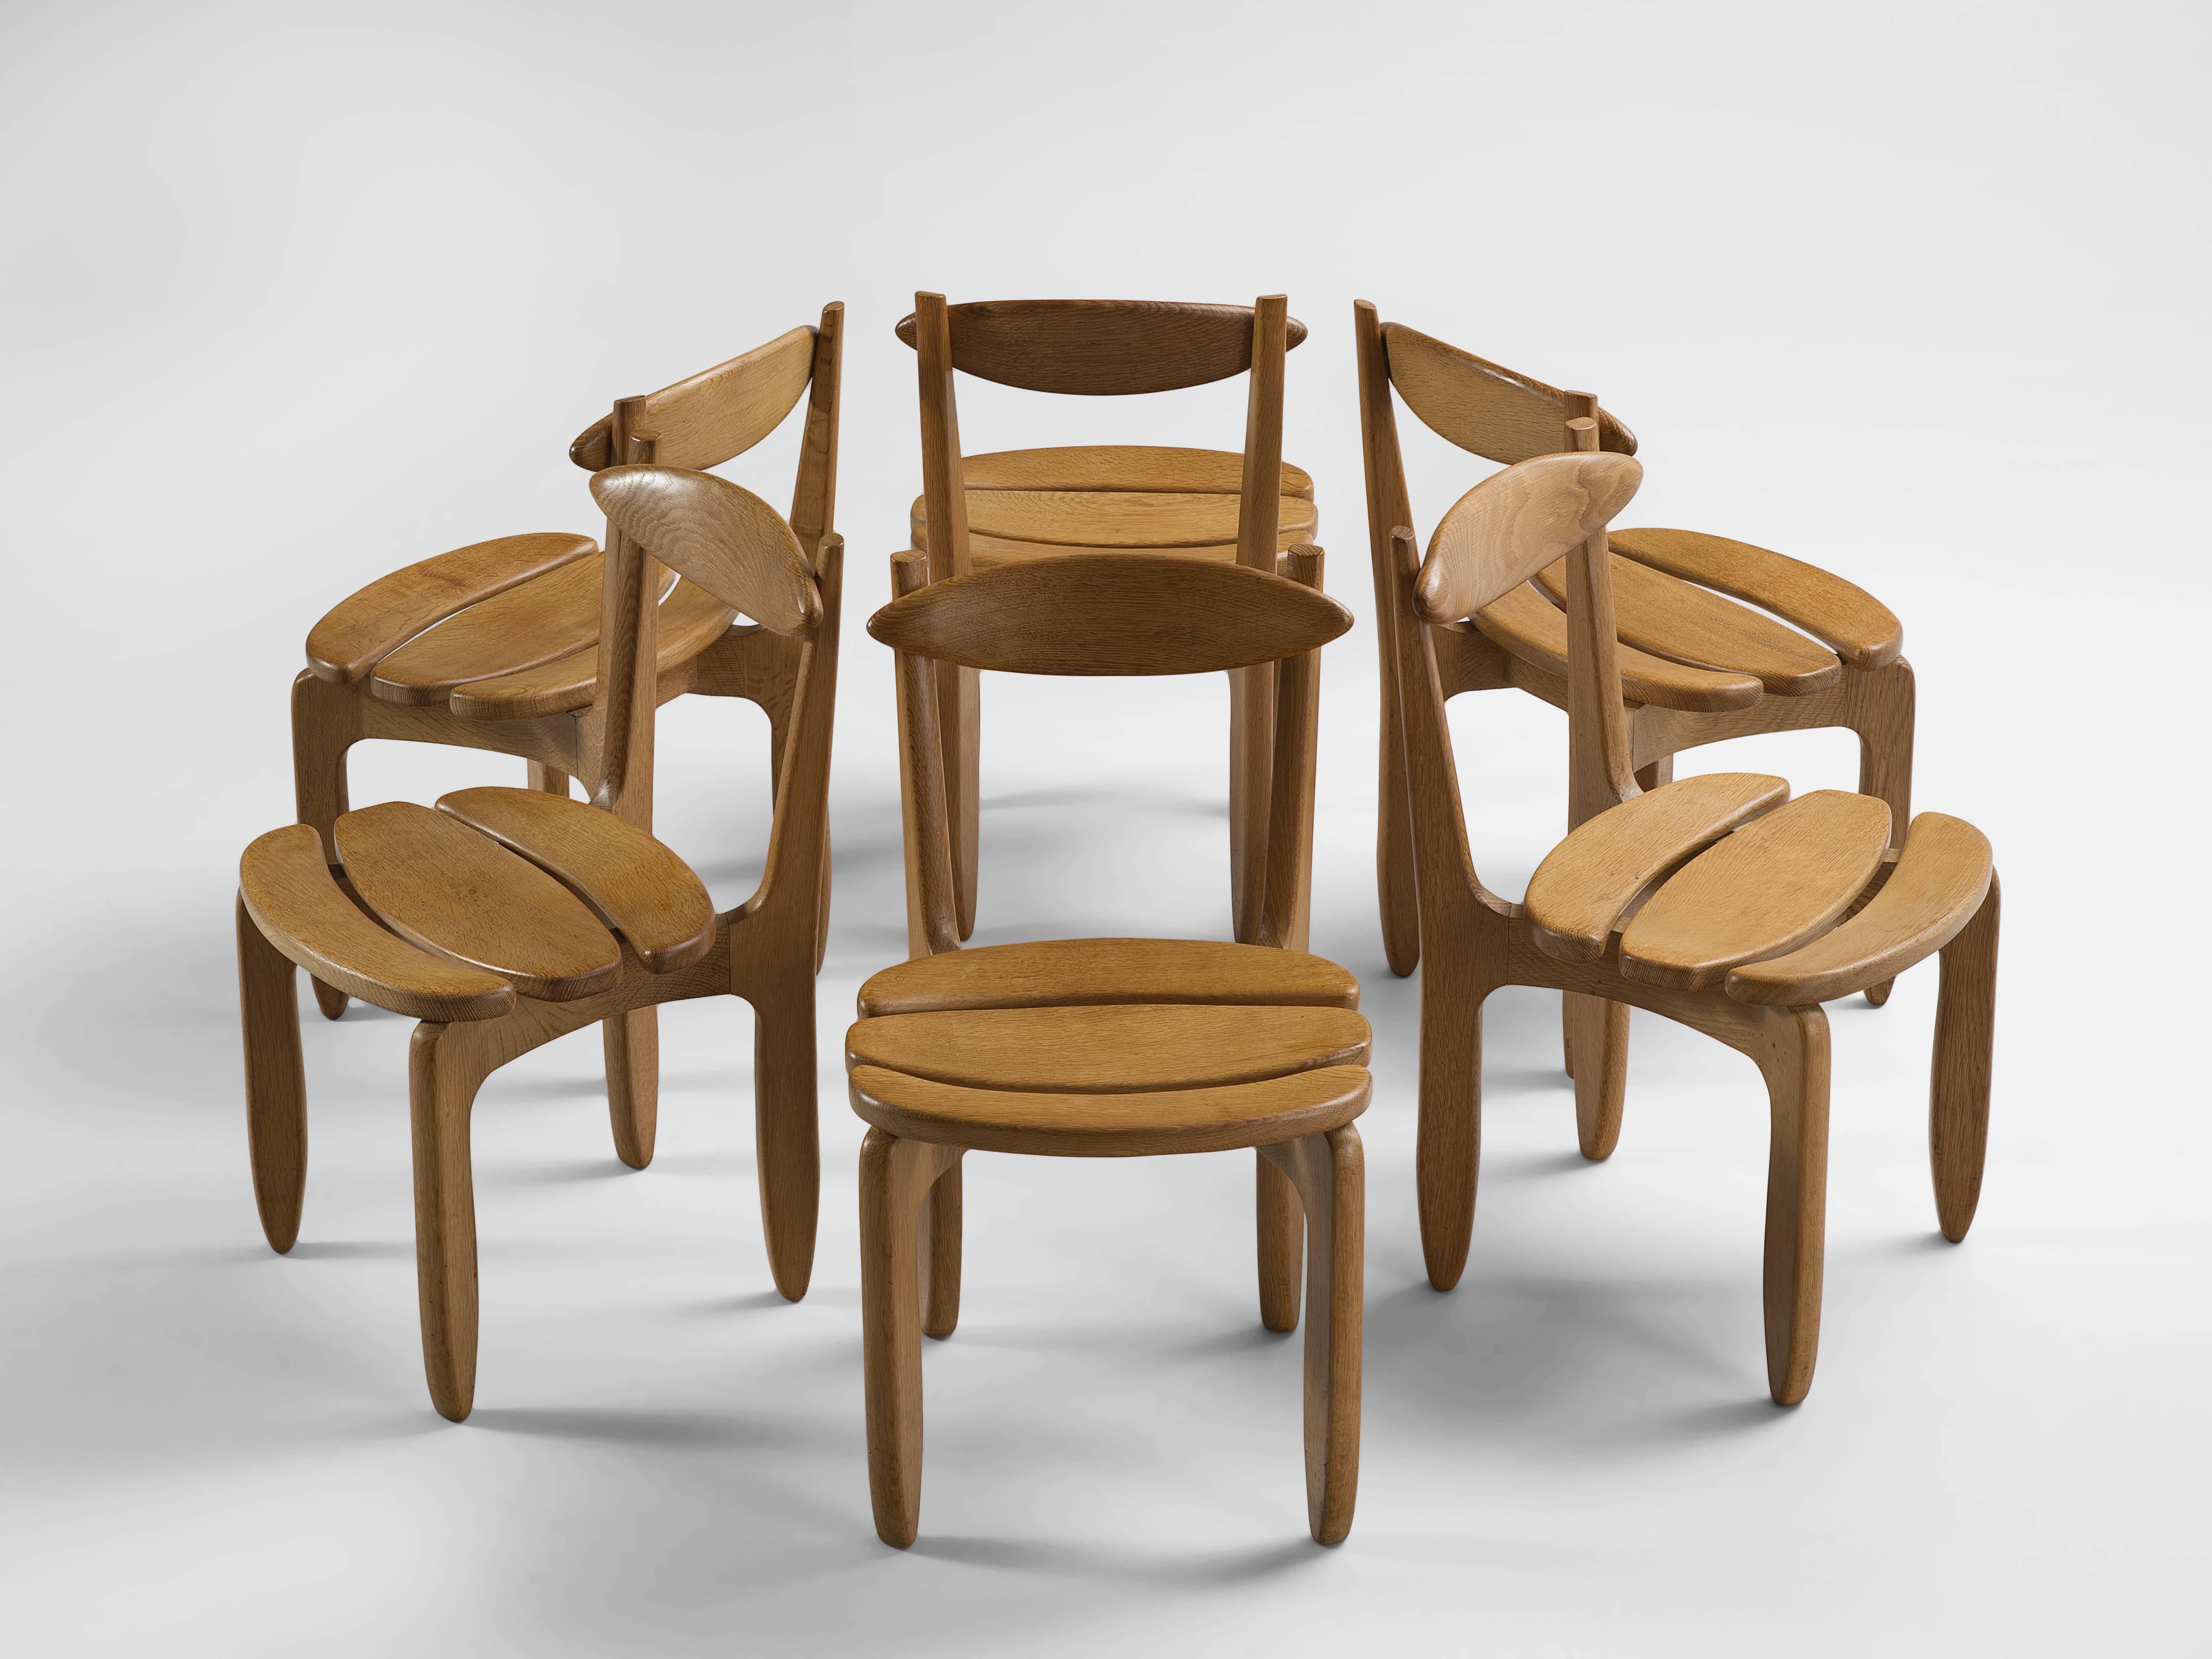 Set of six dining chairs, in oak, by Guillerme & Chambron, France, 1960s.

Set of six elegant dining chairs in solid oak by Guillerme and Chambron. These chairs show the characteristic frame of this French designer duo. Tapered legs and a sculptural